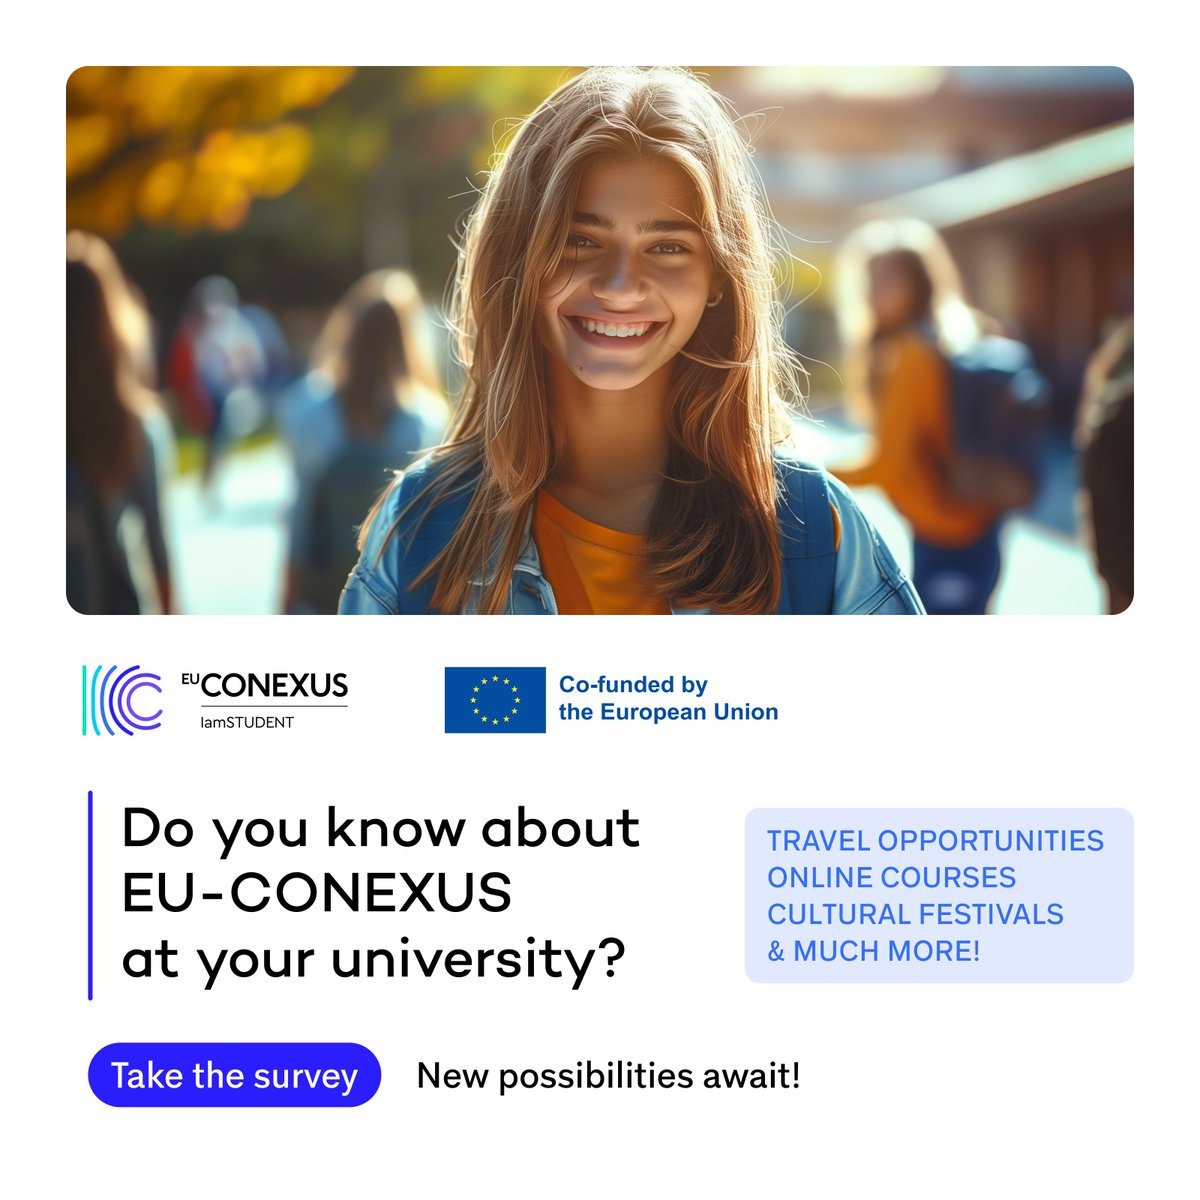 🌟Did you know all of this was happening at your university? 🗣️ Help us to understand how much students know about EU-CONEXUS, how to raise awareness and engage more students. 📝 Fill in the survey: surveymonkey.com/r/CDDKN3H @SETUIreland @UTCB_RO @UnivLaRochelle @UCV_svm